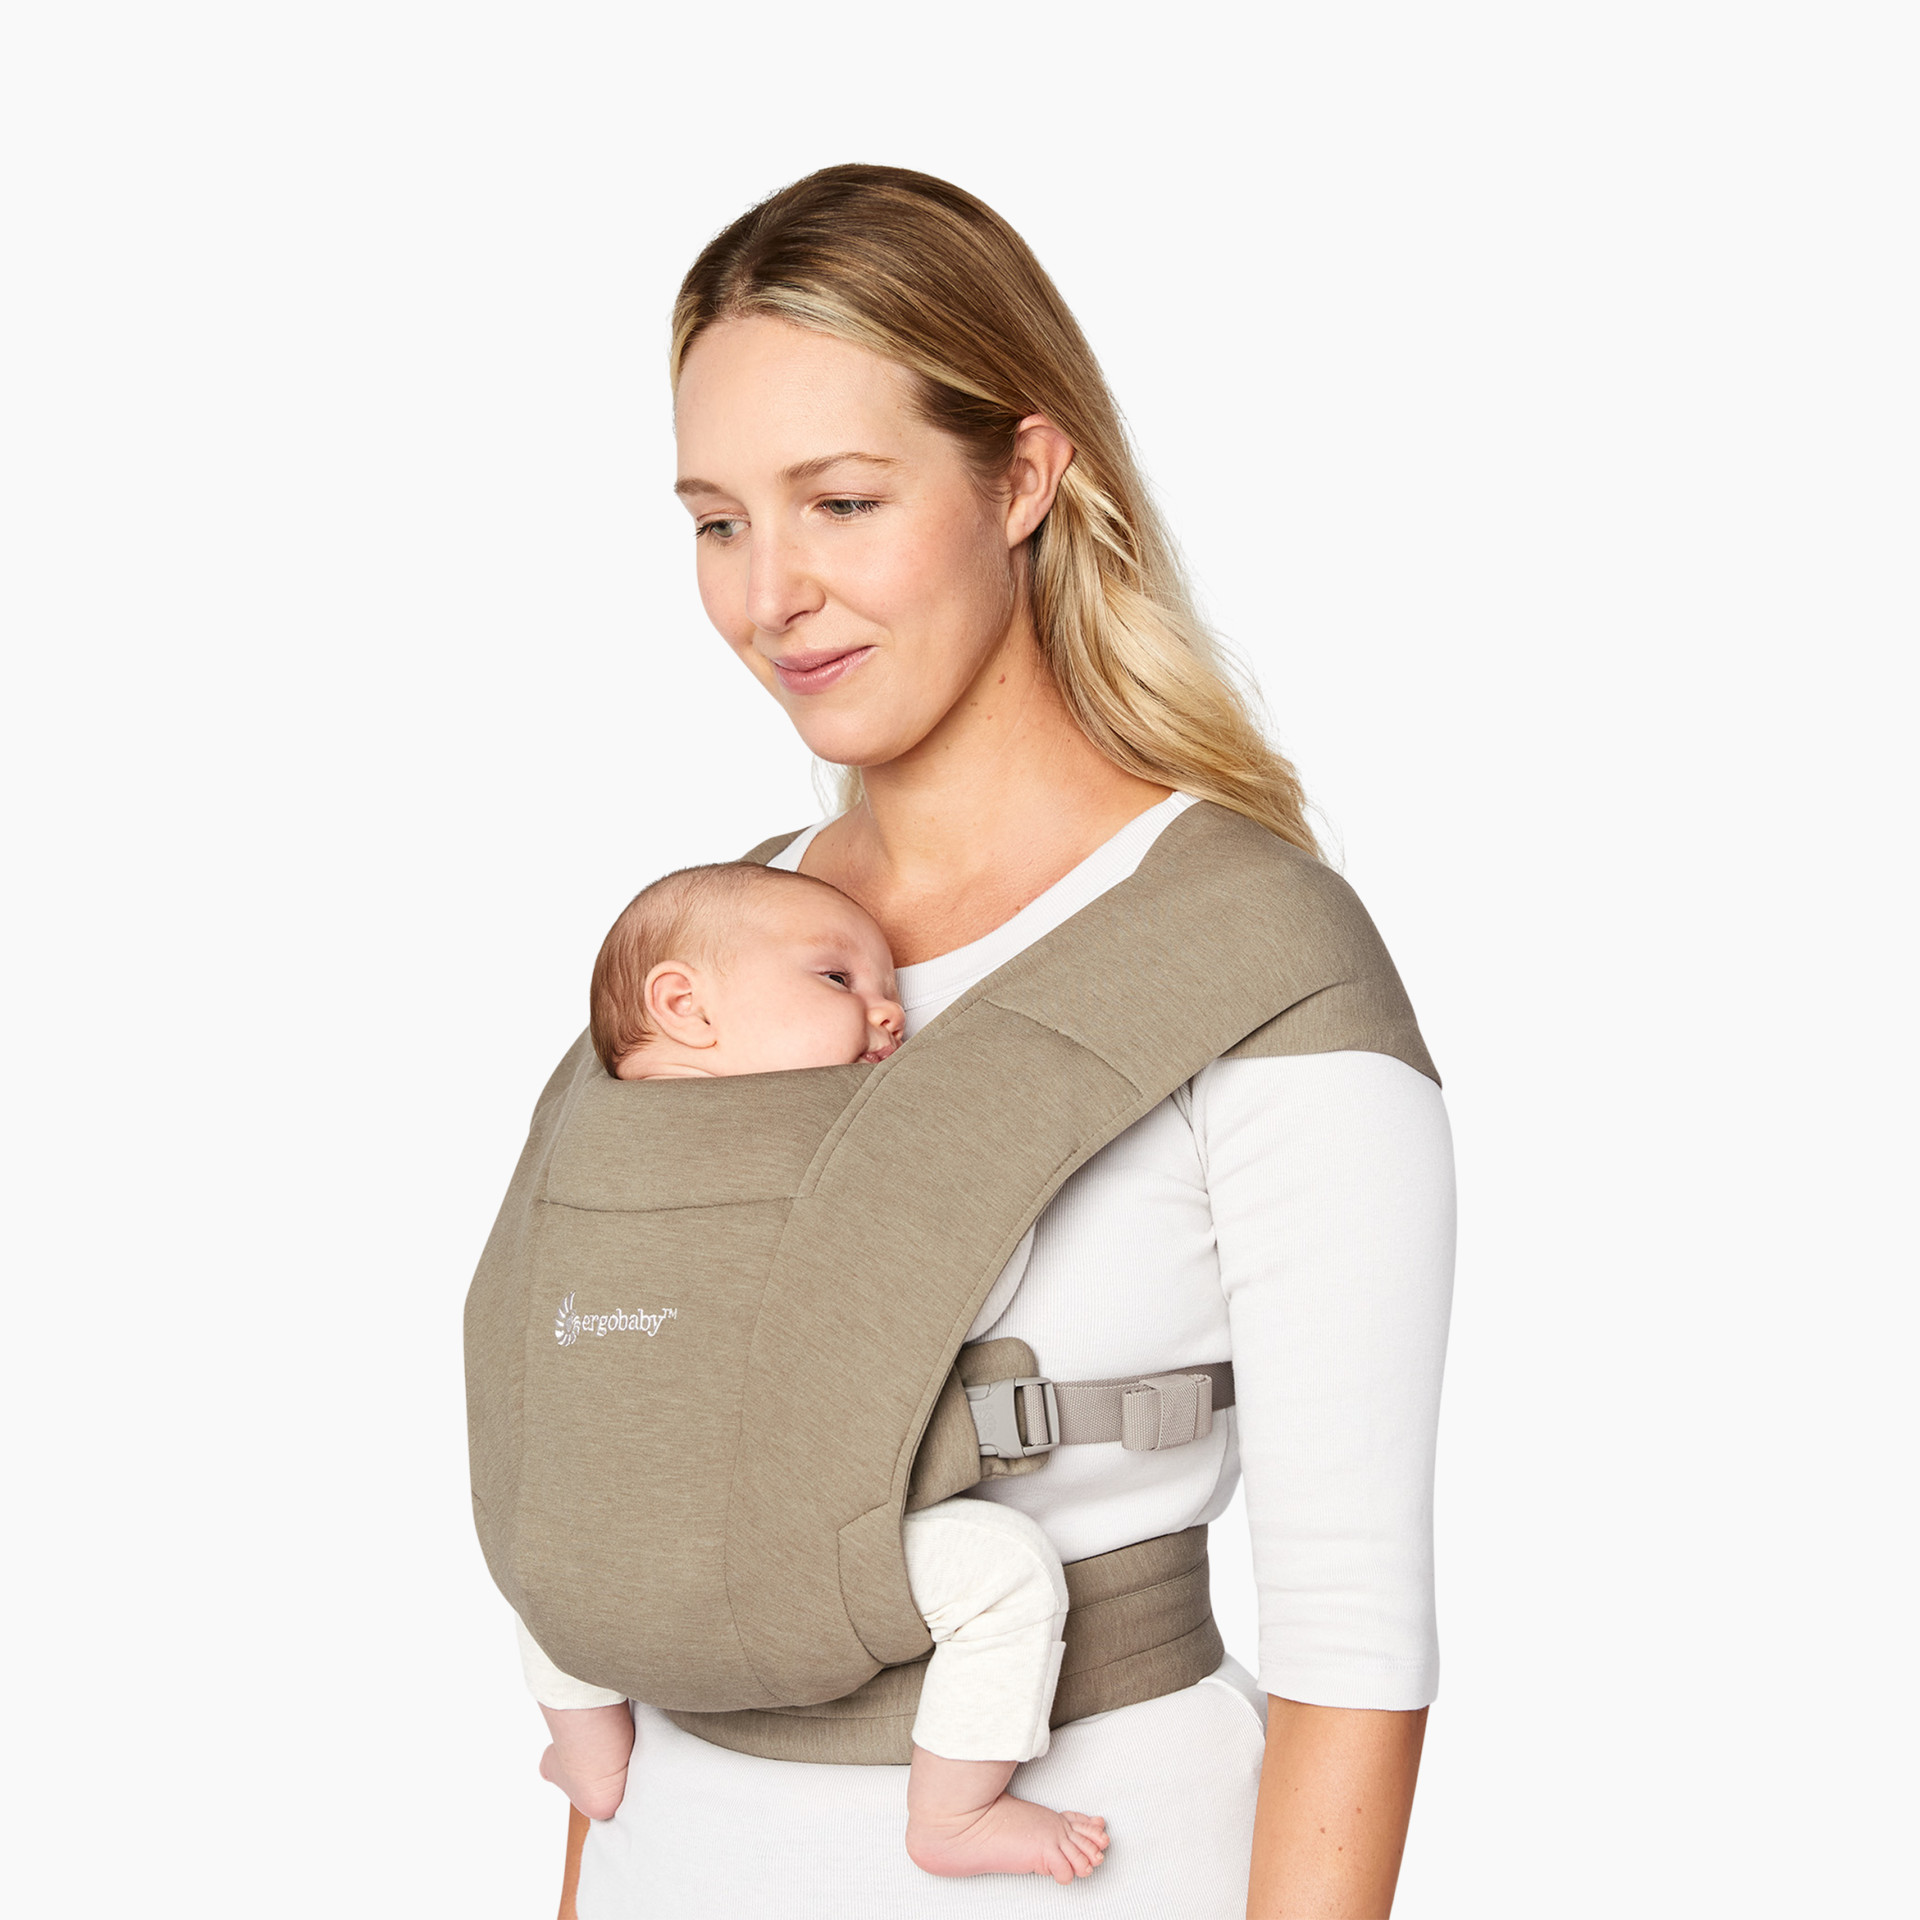 Ergobaby Embrace Baby Carrier, Navy